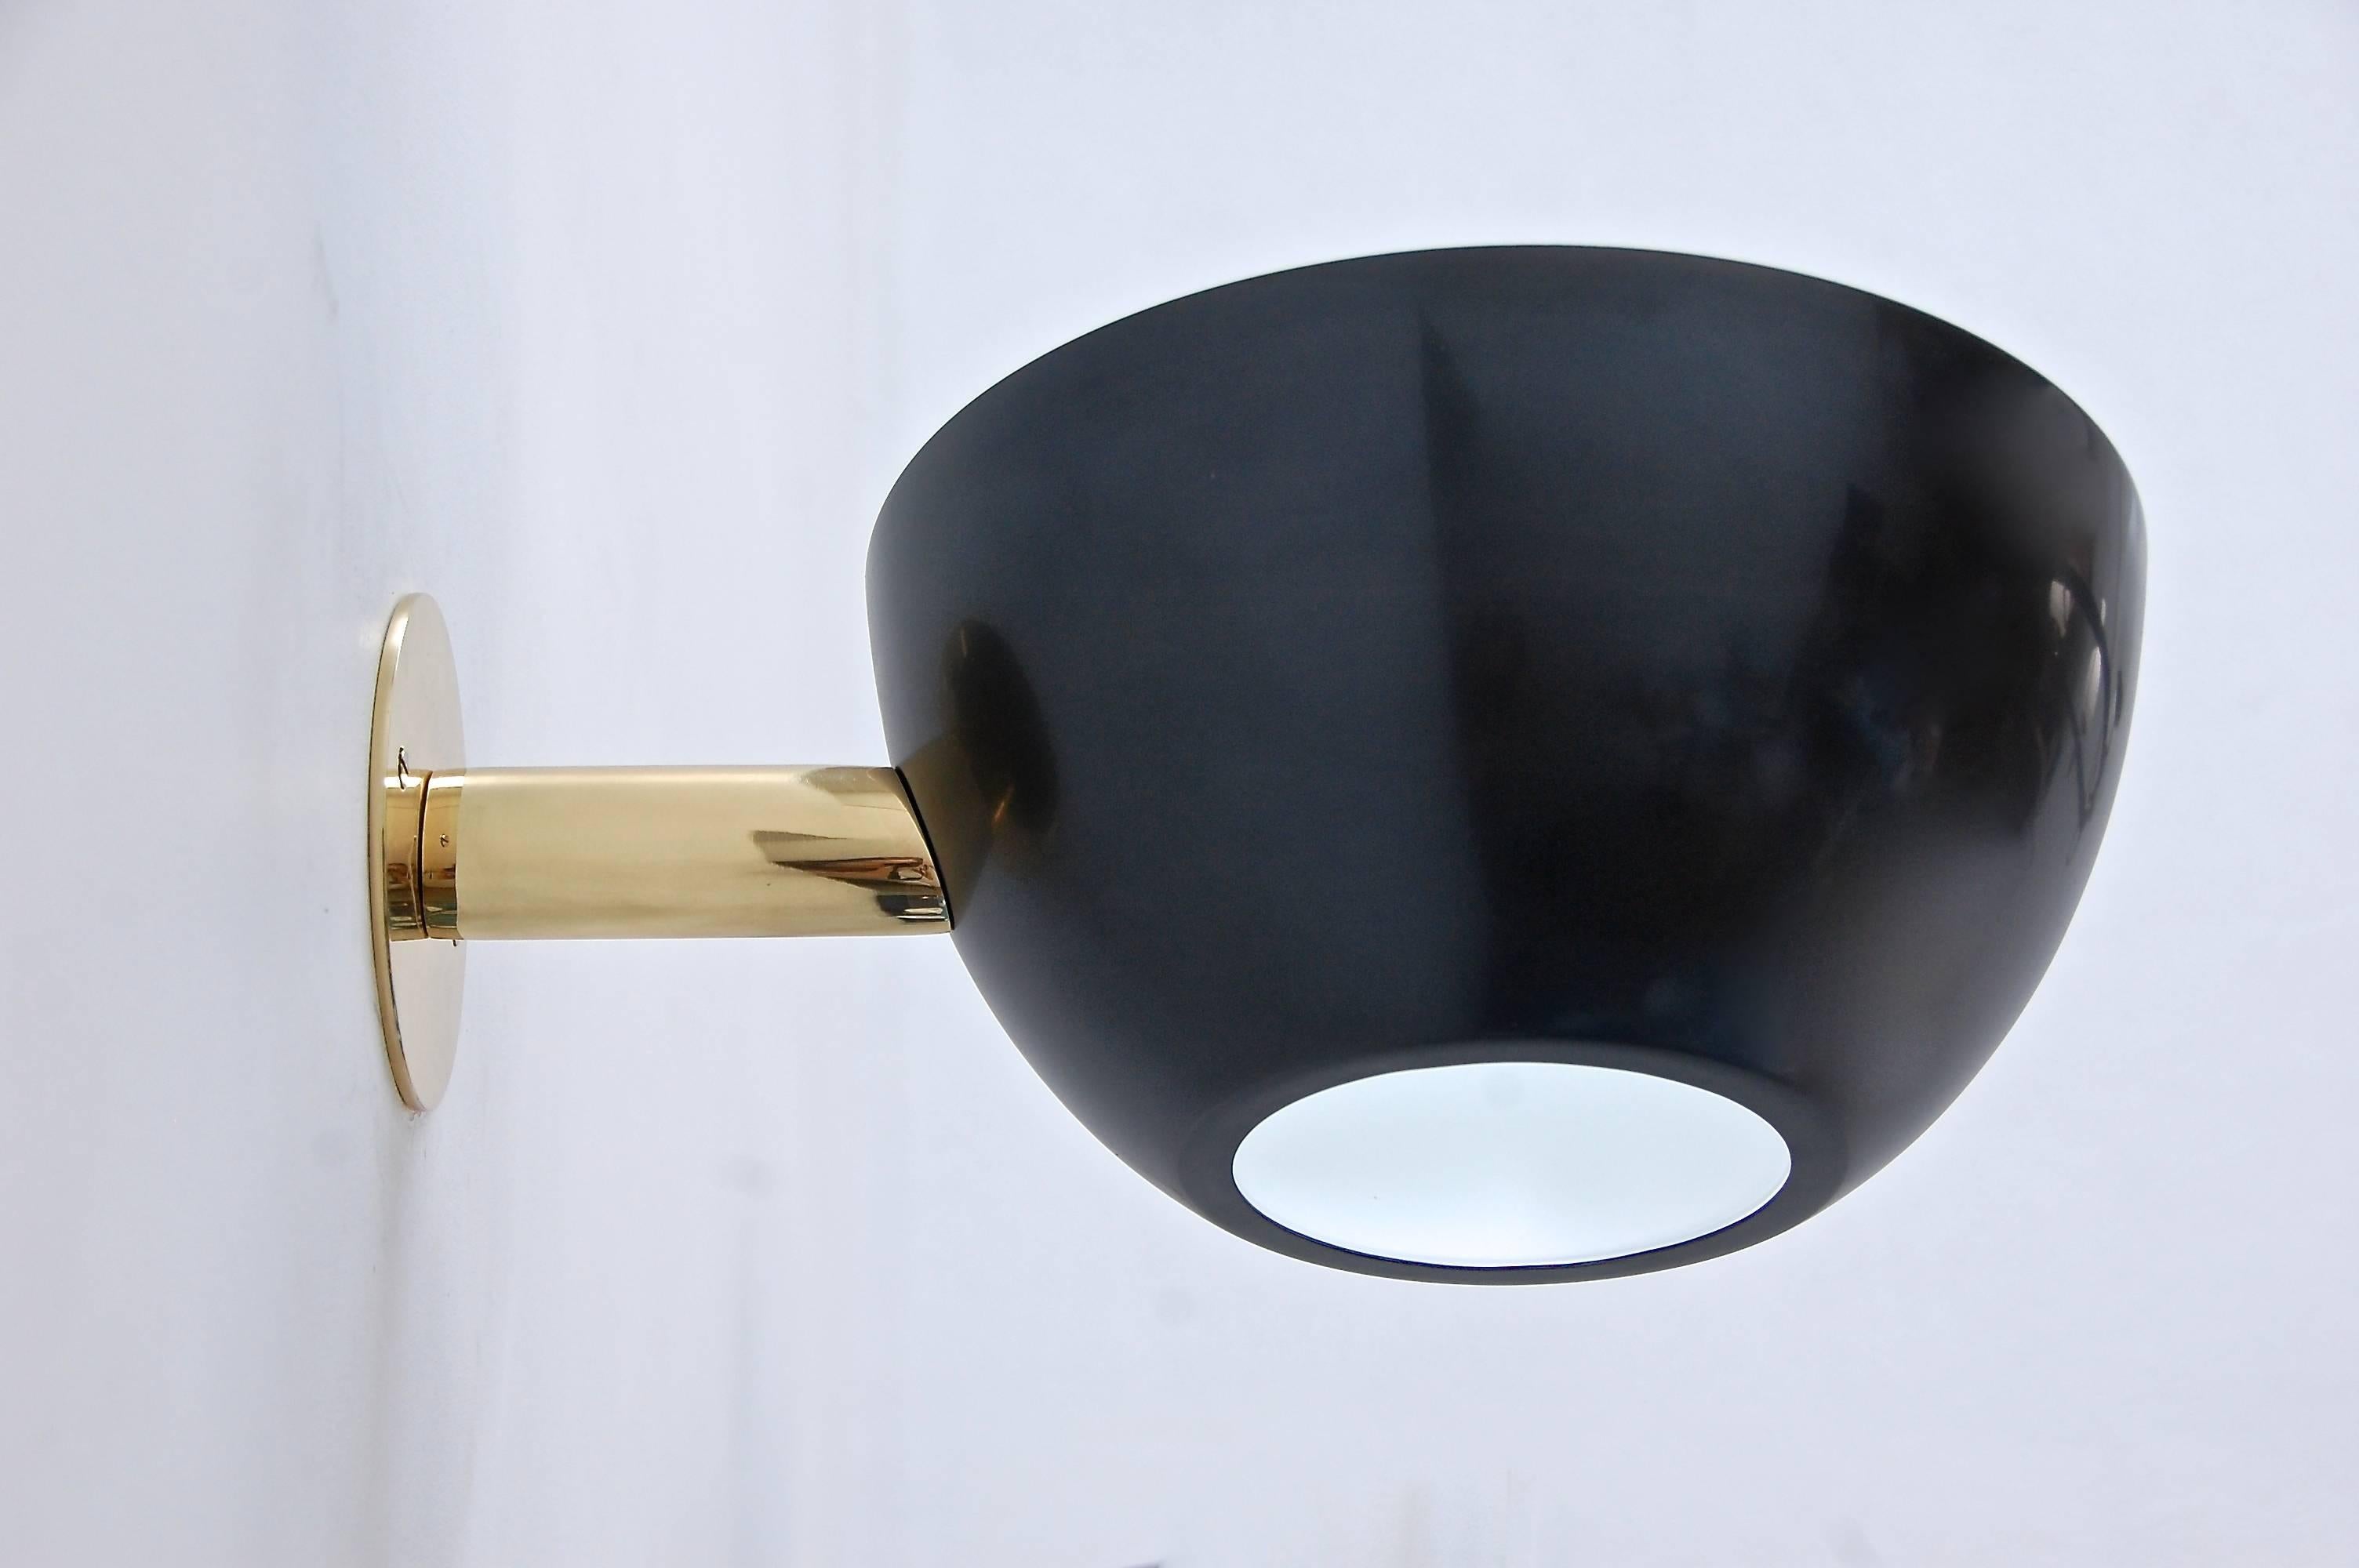 Inspired by 1950s Italian Design, this custom sconce is a companion piece to our large LUcrown chandelier. Single medium based socket. Dark patinated steel finish (shade) and lightly aged brass hardware. Priced individually. Multiples available to